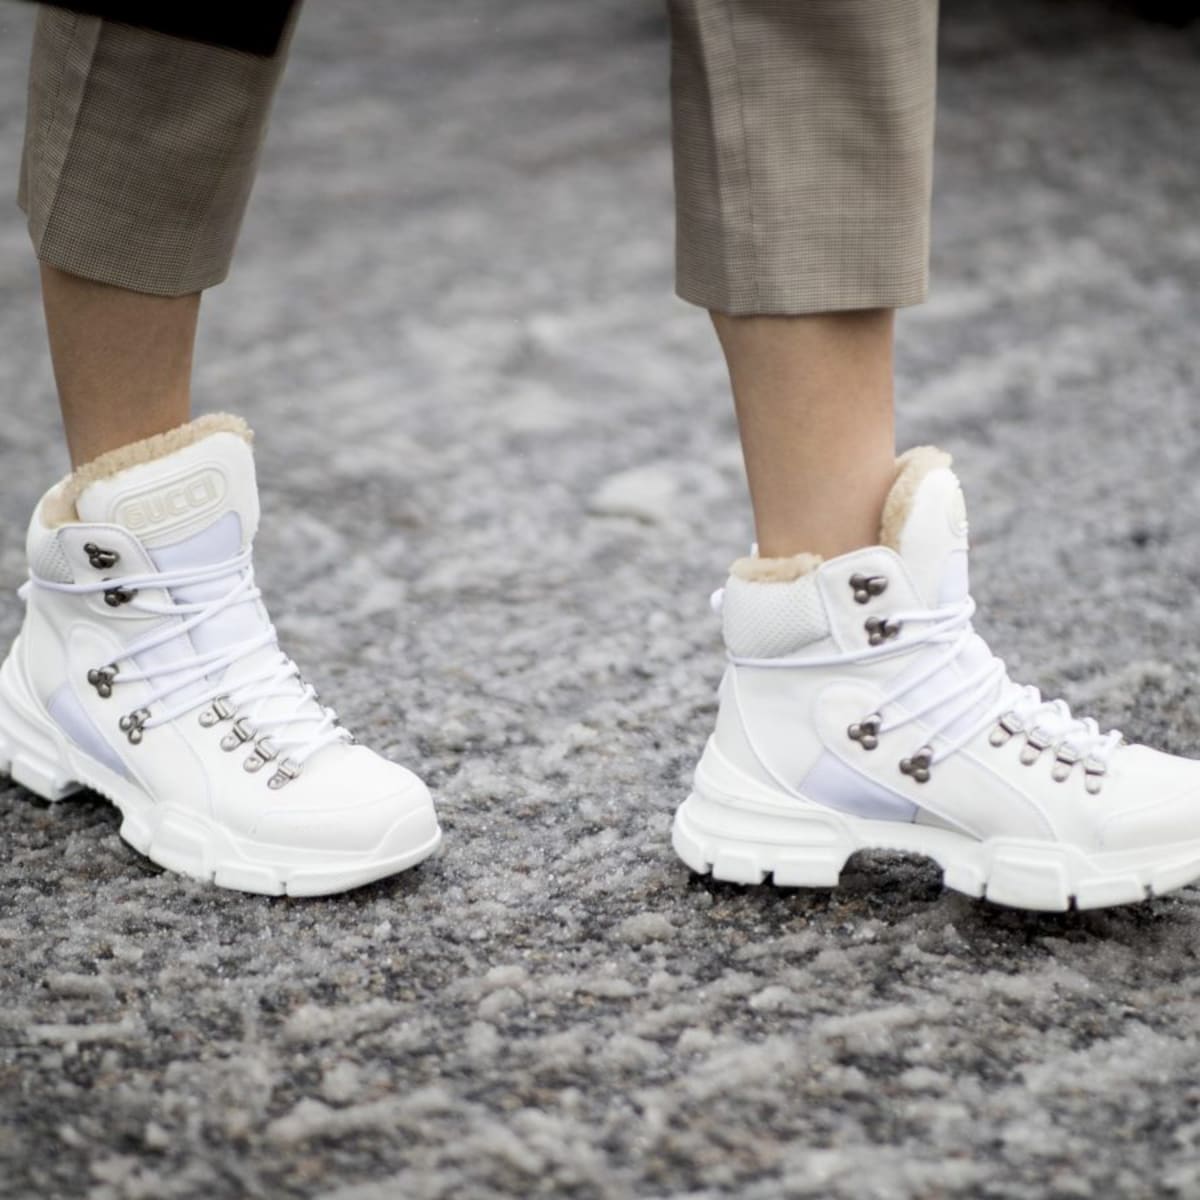 Tolkning skjold investering 26 Weatherproof Shoes That Will Turn Heads on Any Snow-Covered Street -  Fashionista